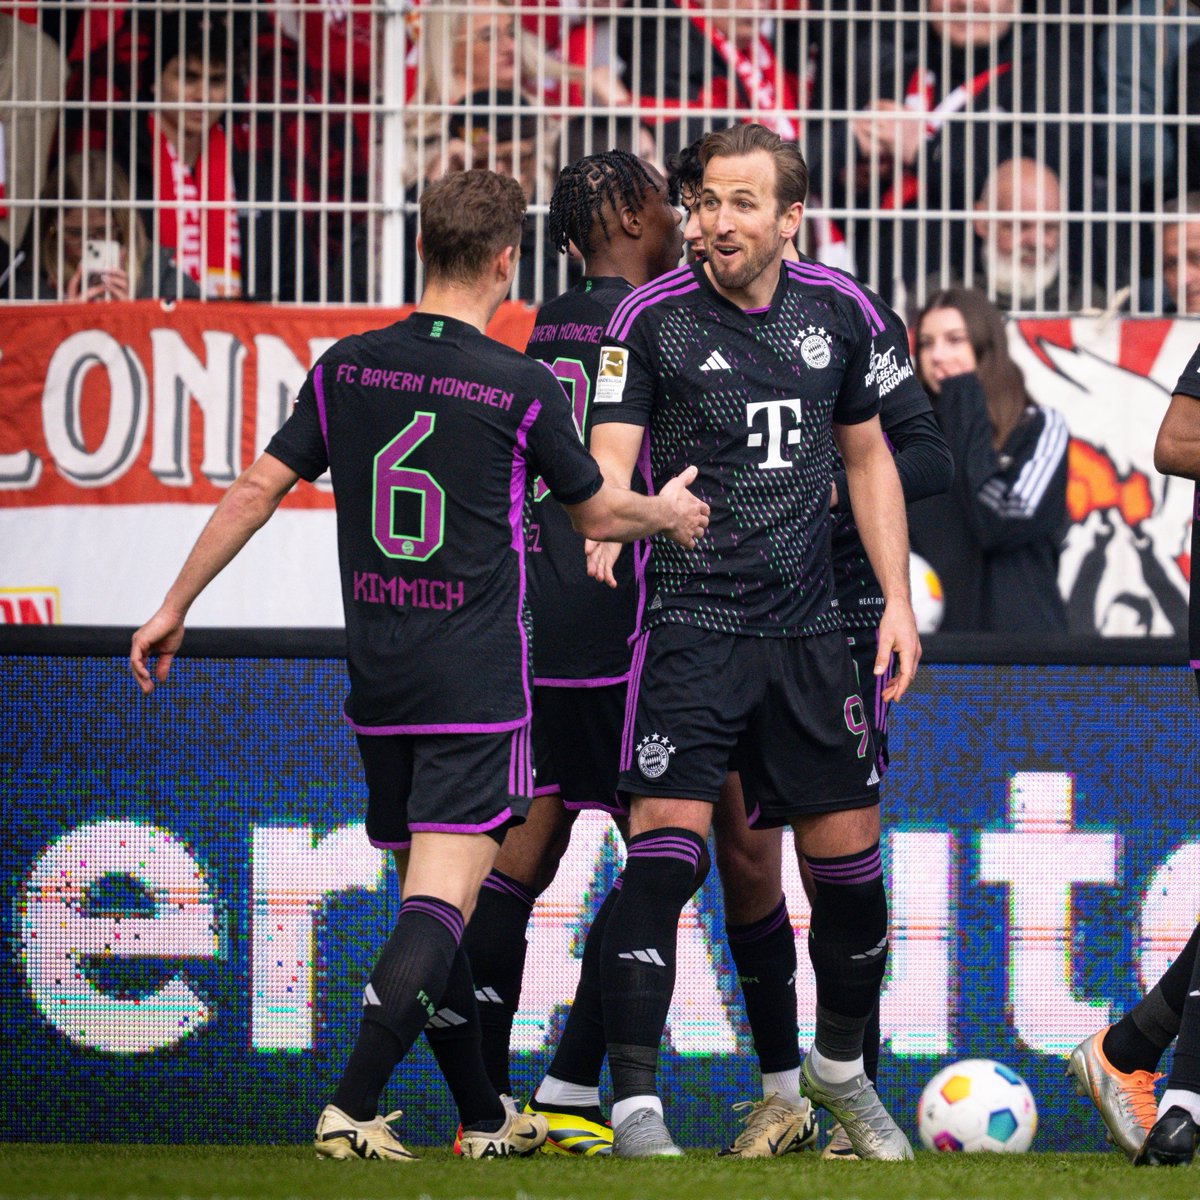 Harry Kane now has 33 Bundesliga goal in his debut season with Bayern. What a player.